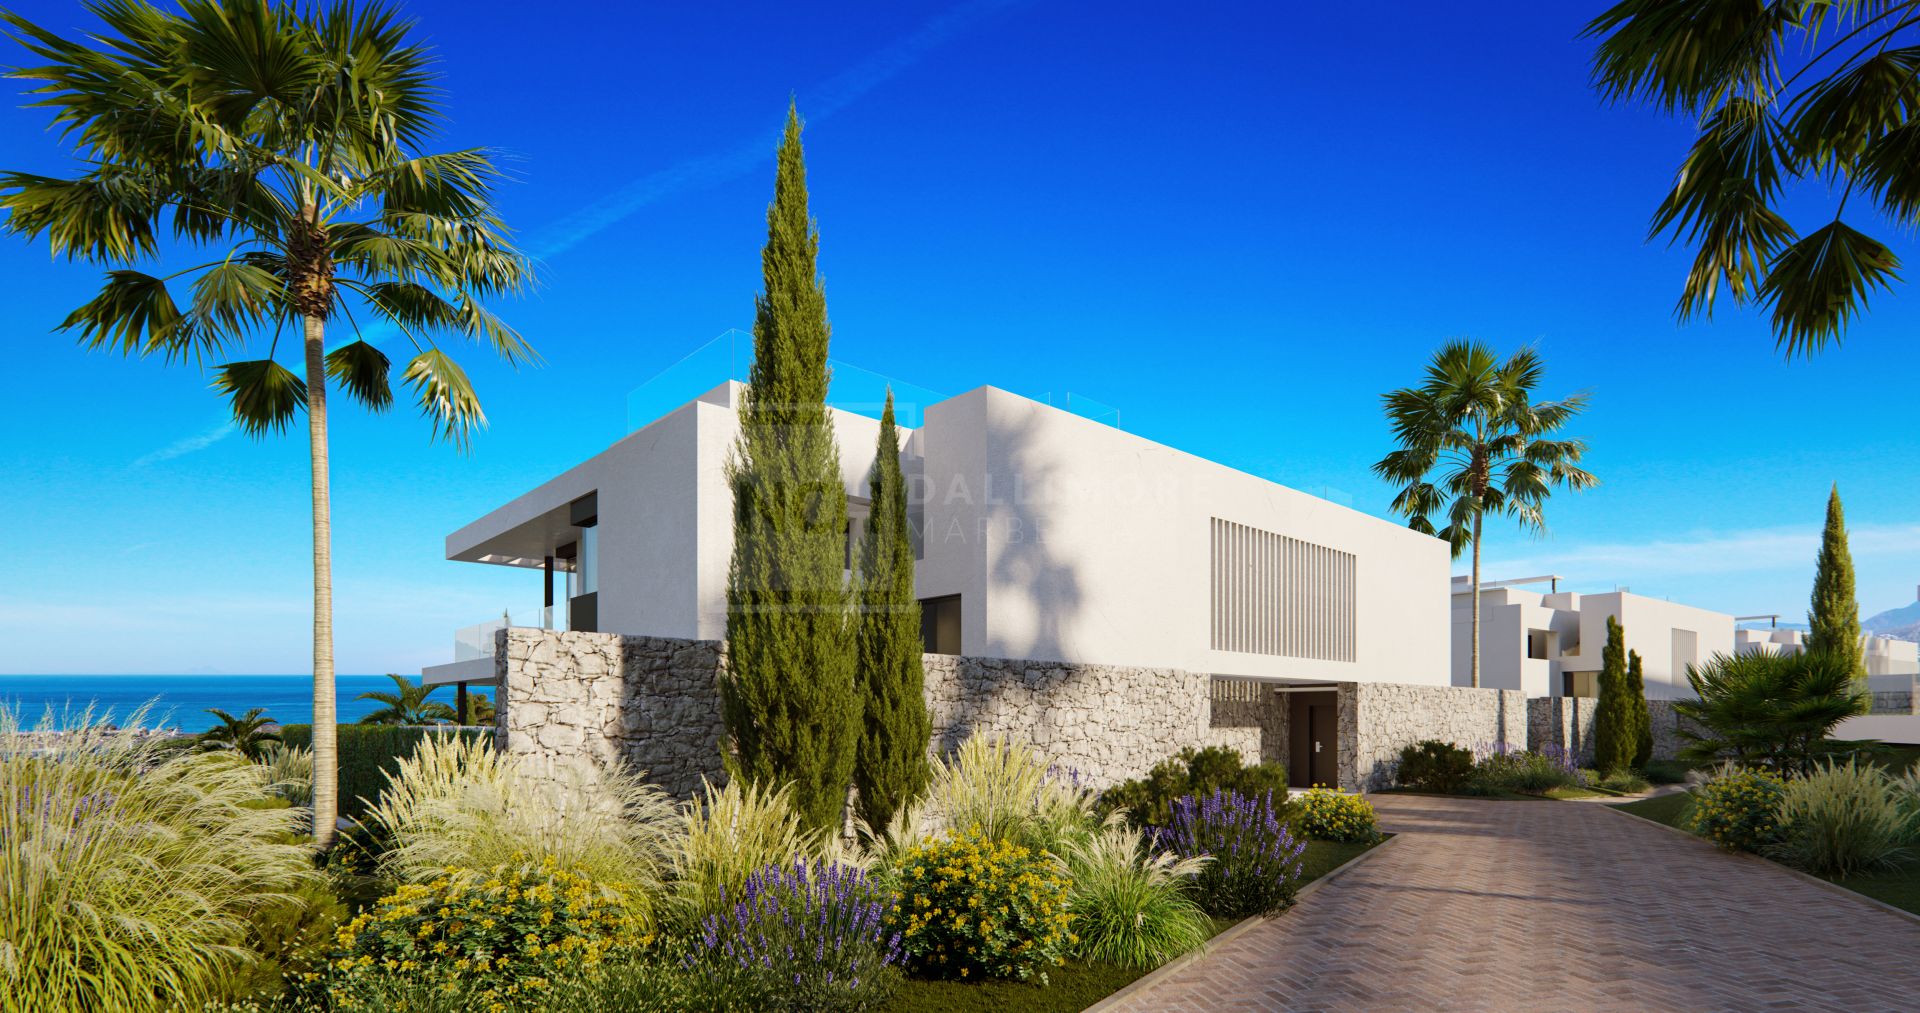 STUNNING BRAND NEW 3-BEDROOM CONTEMPORARY APARTMENT WITH SEA VIEWS EAST OF MARBELLA